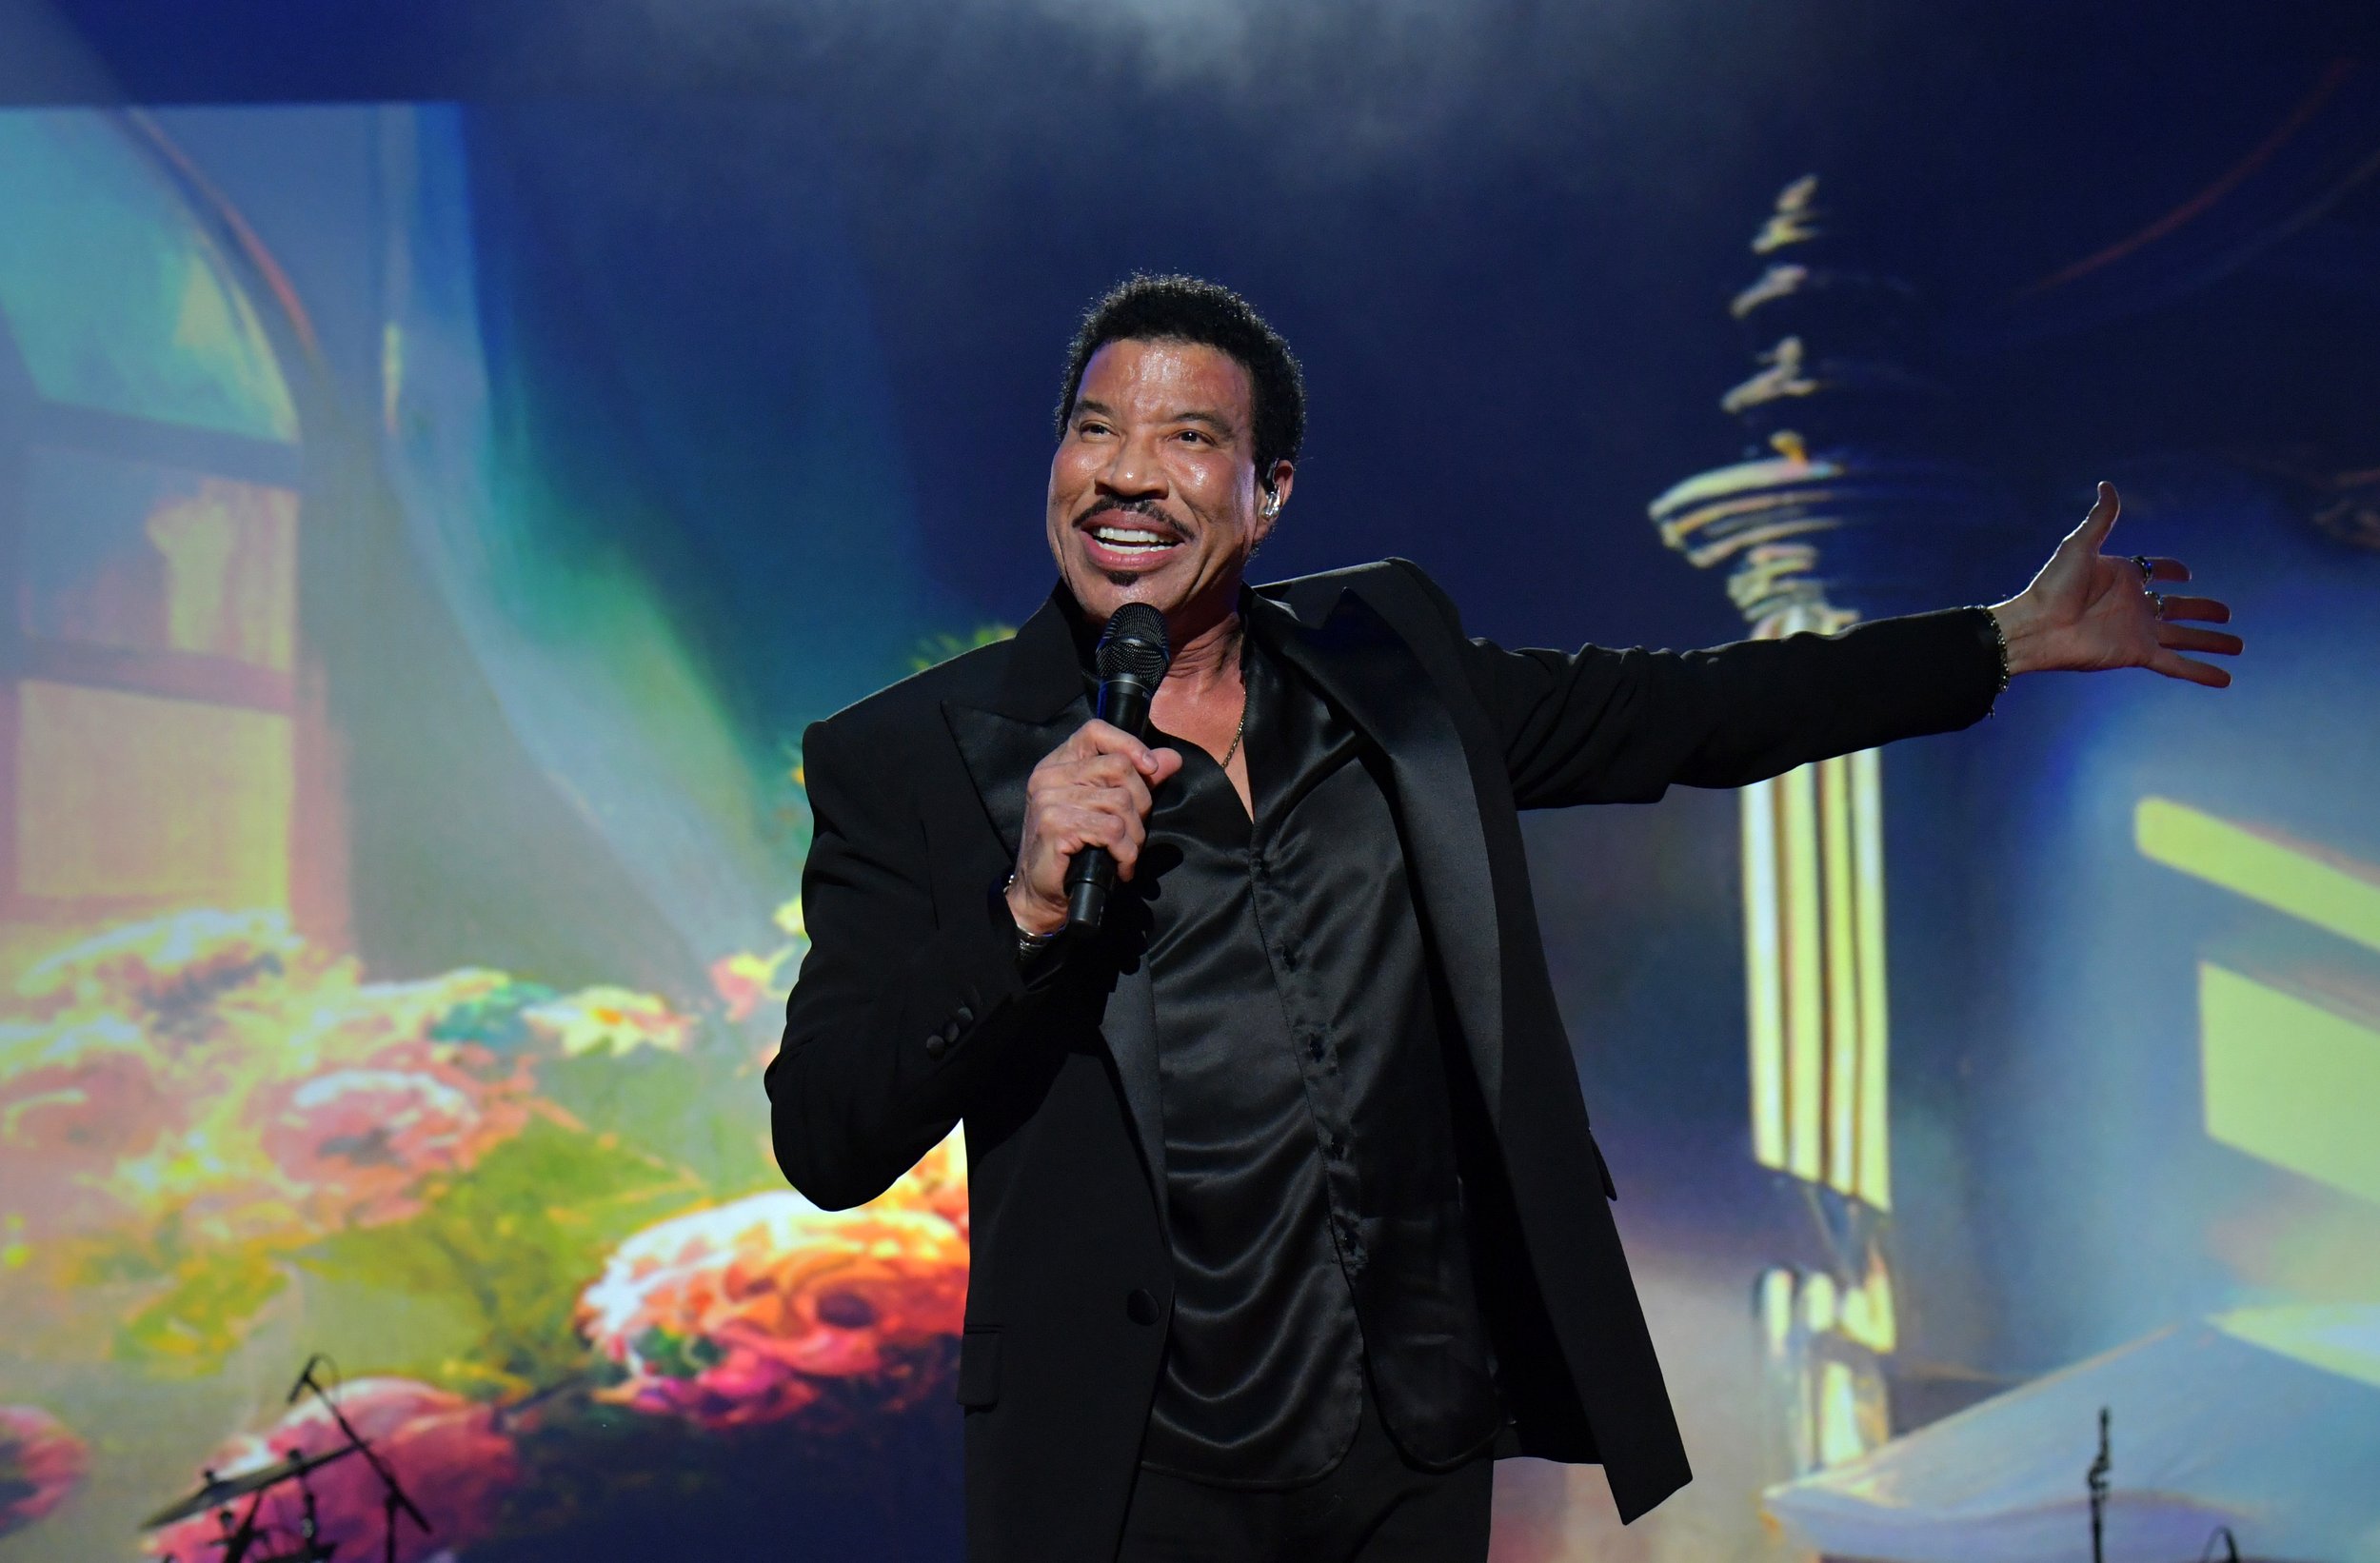  LOS ANGELES, CALIFORNIA - FEBRUARY 03: Lionel Richie performs onstage during MusiCares Persons of the Year Honoring Berry Gordy and Smokey Robinson at Los Angeles Convention Center on February 03, 2023 in Los Angeles, California. (Photo by Lester Co